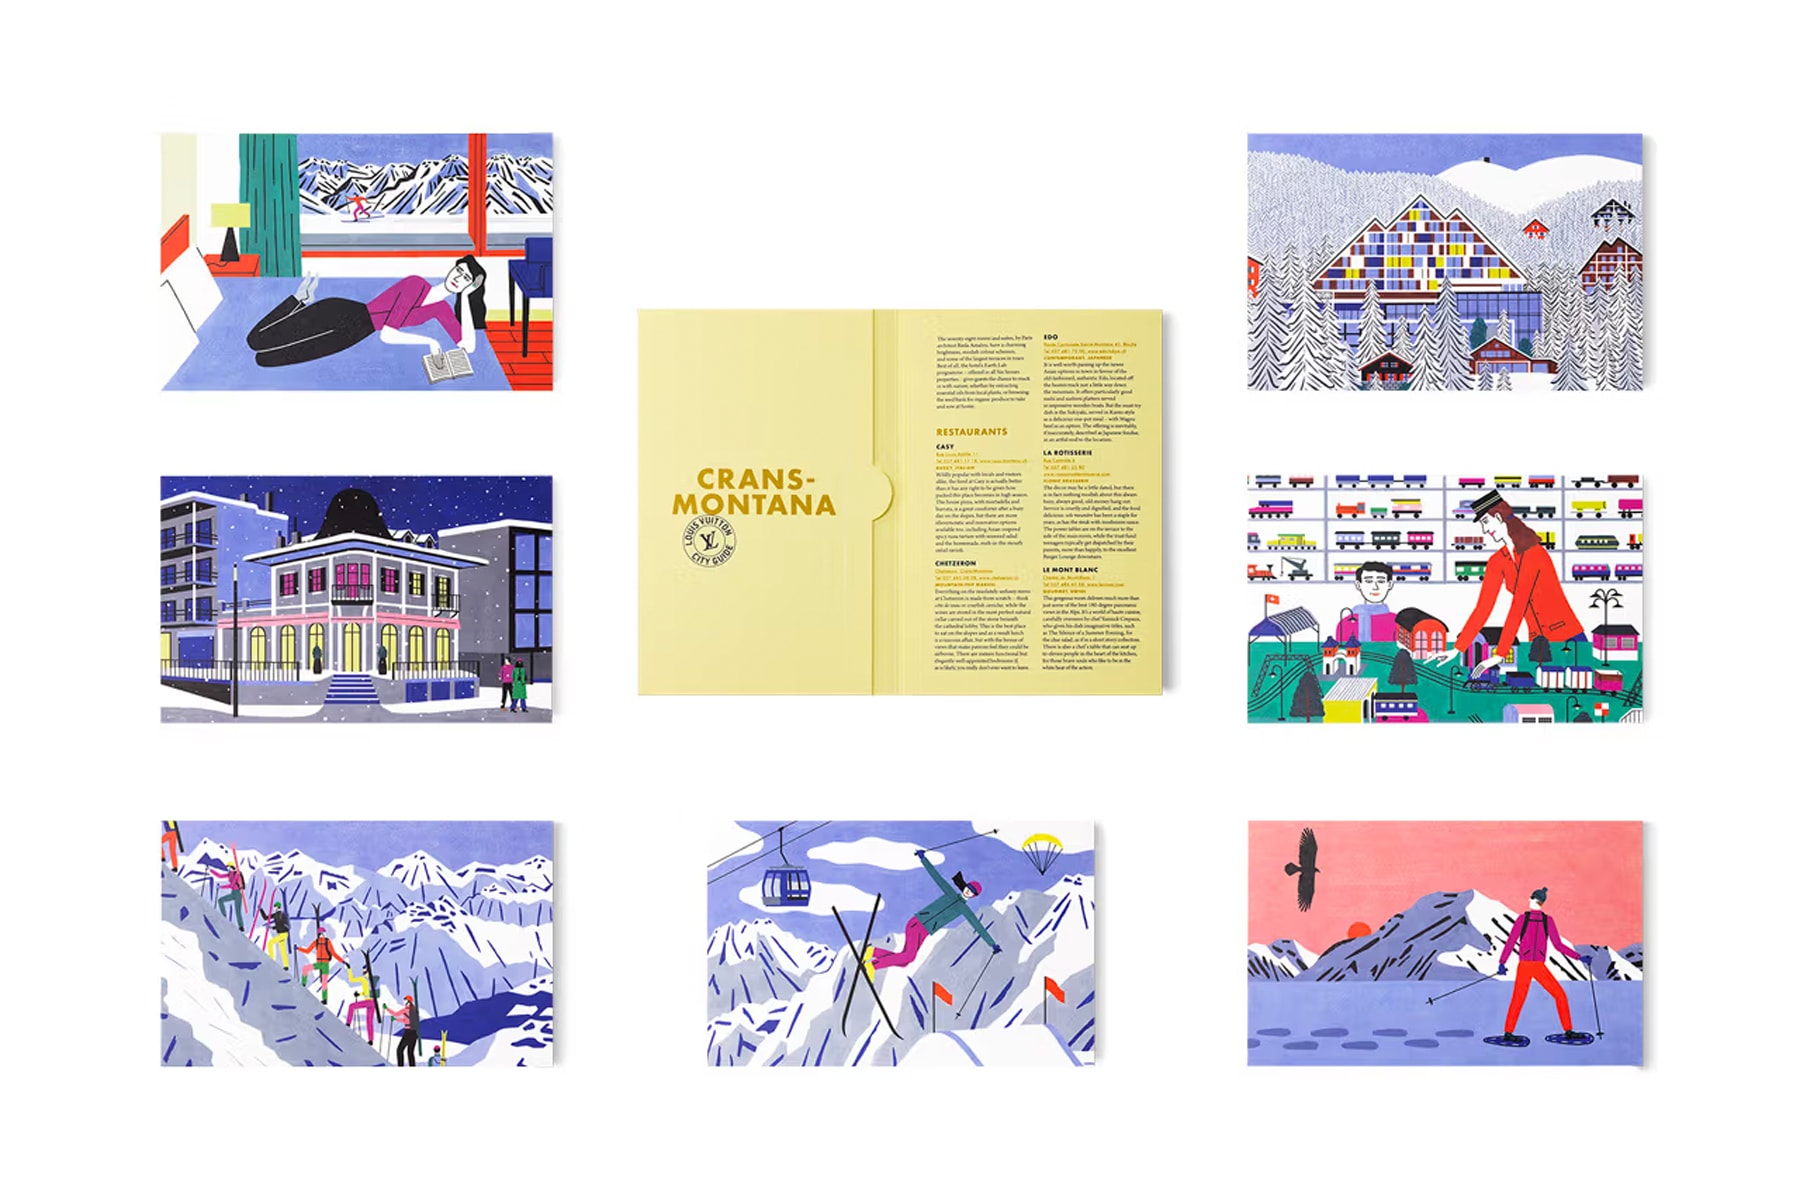 Louis Vuitton 正式推出全新城市指南書籍套裝《Winter Resorts City Guide Box Set》